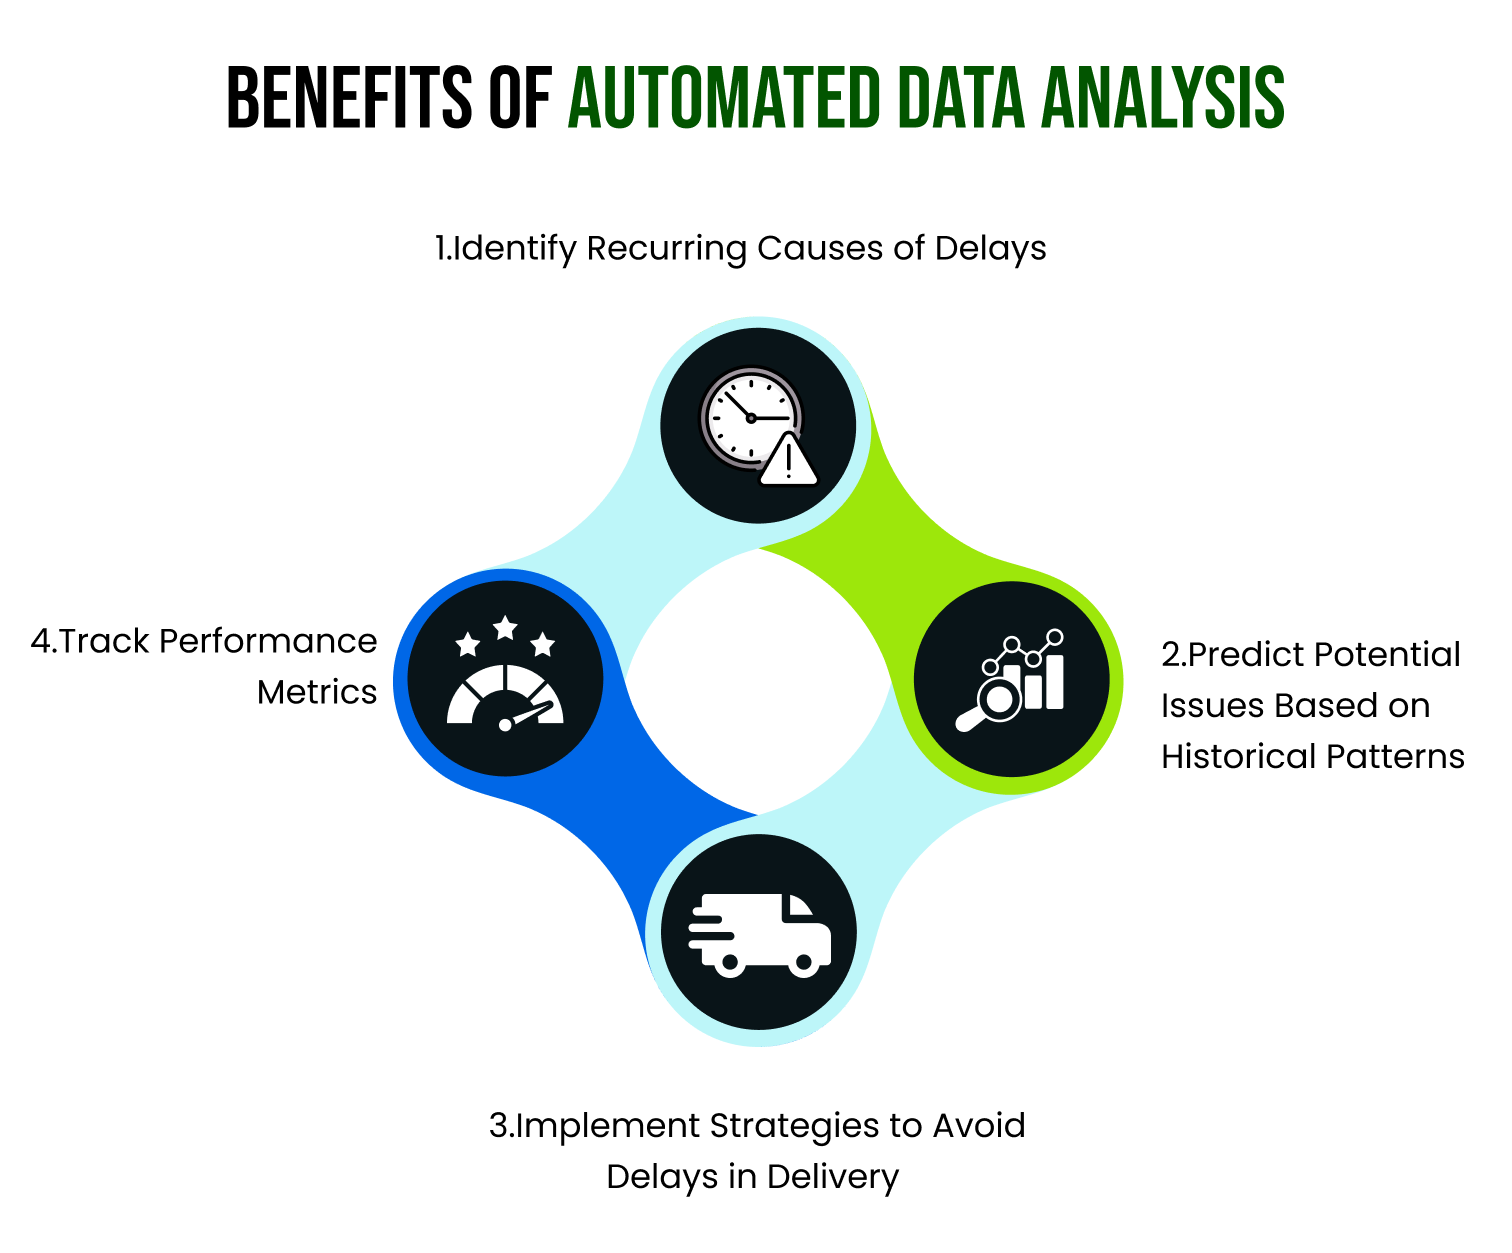 The Benefits: Unleashing the Power of Data 